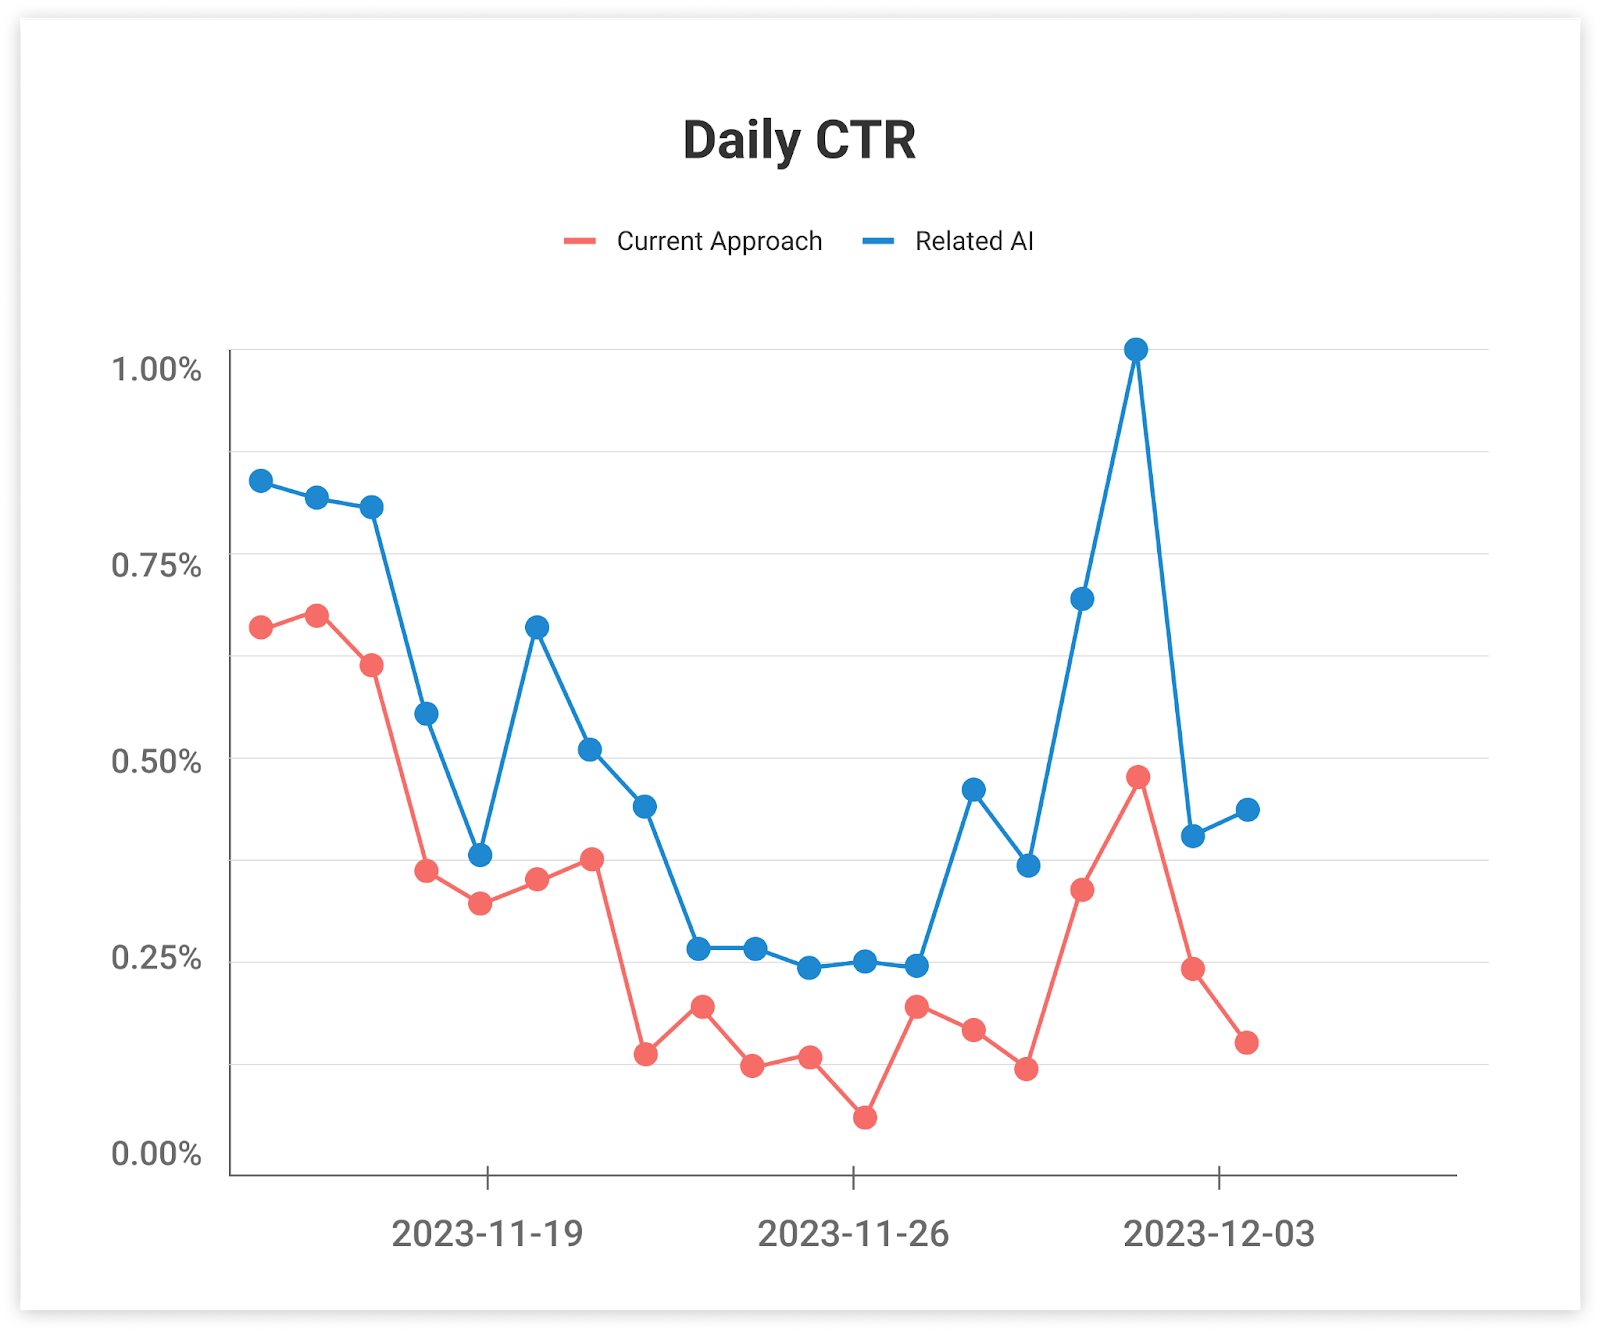 line graph displaying low daily CTR in red and improved AI-related CTR in blue